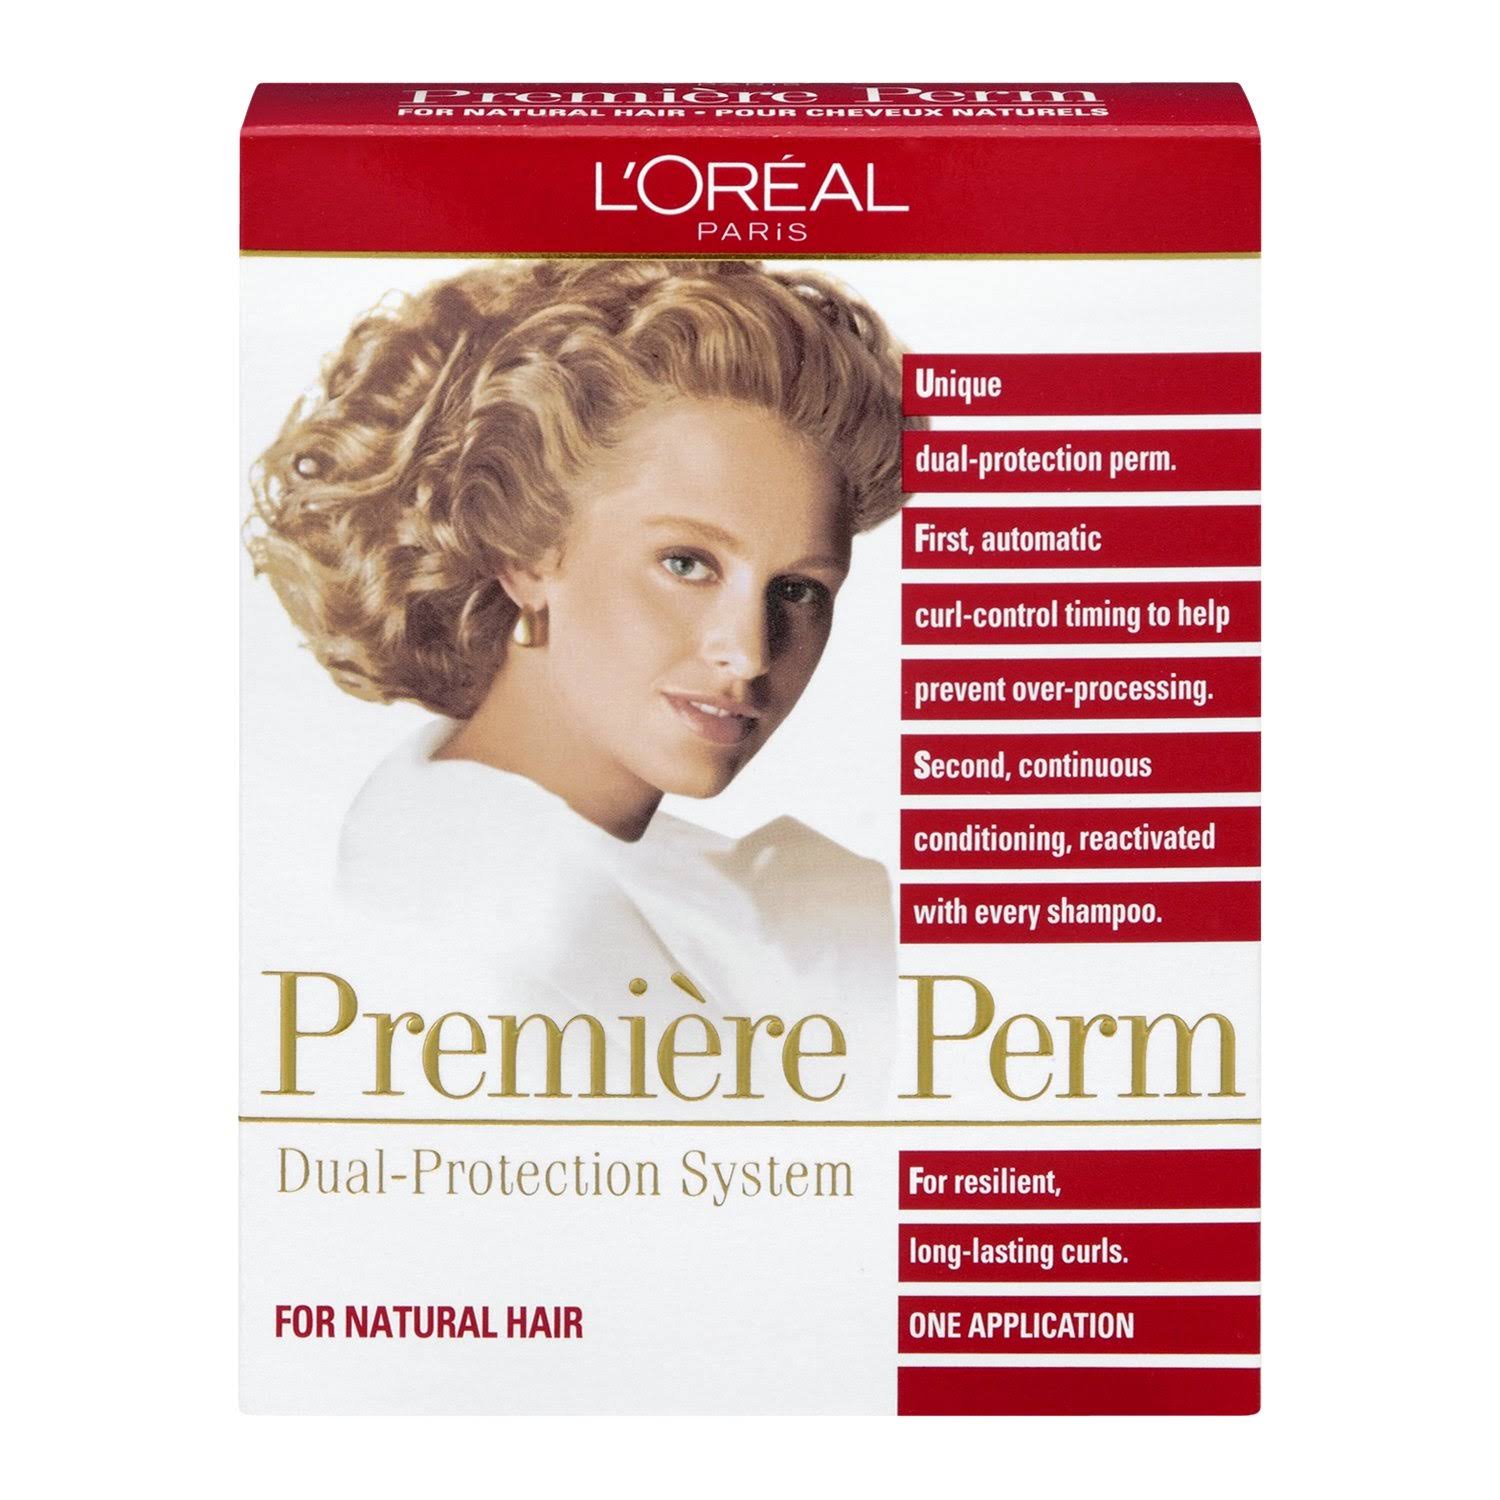 L'Oreal Premiere Perm Dual Protection System for Natural Hair